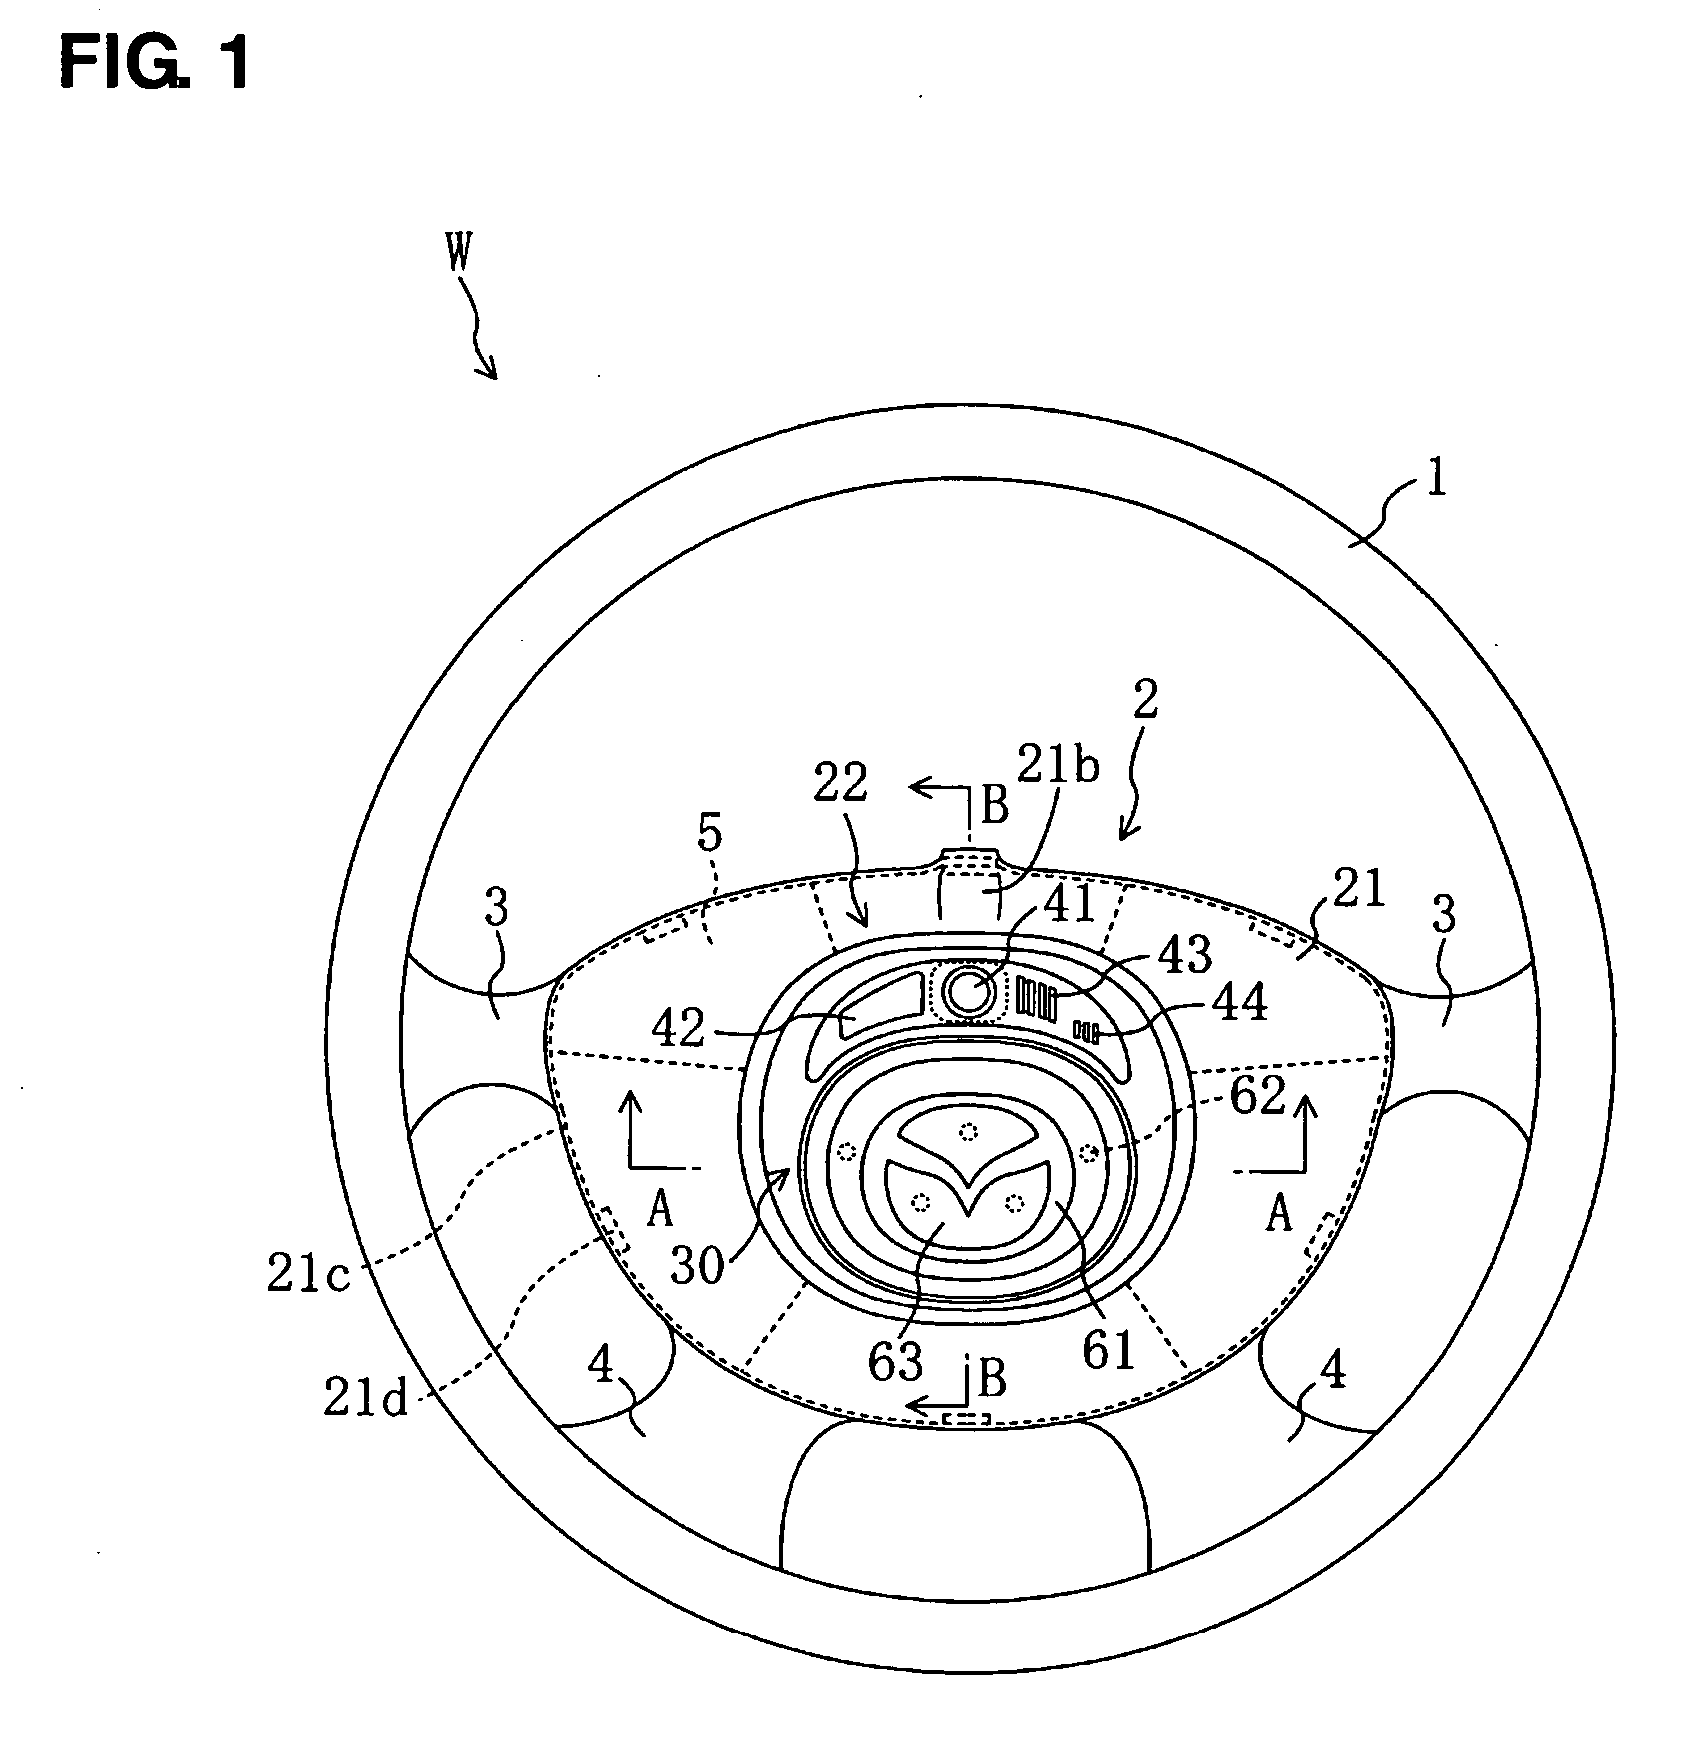 Steering wheel equipped with airbag device